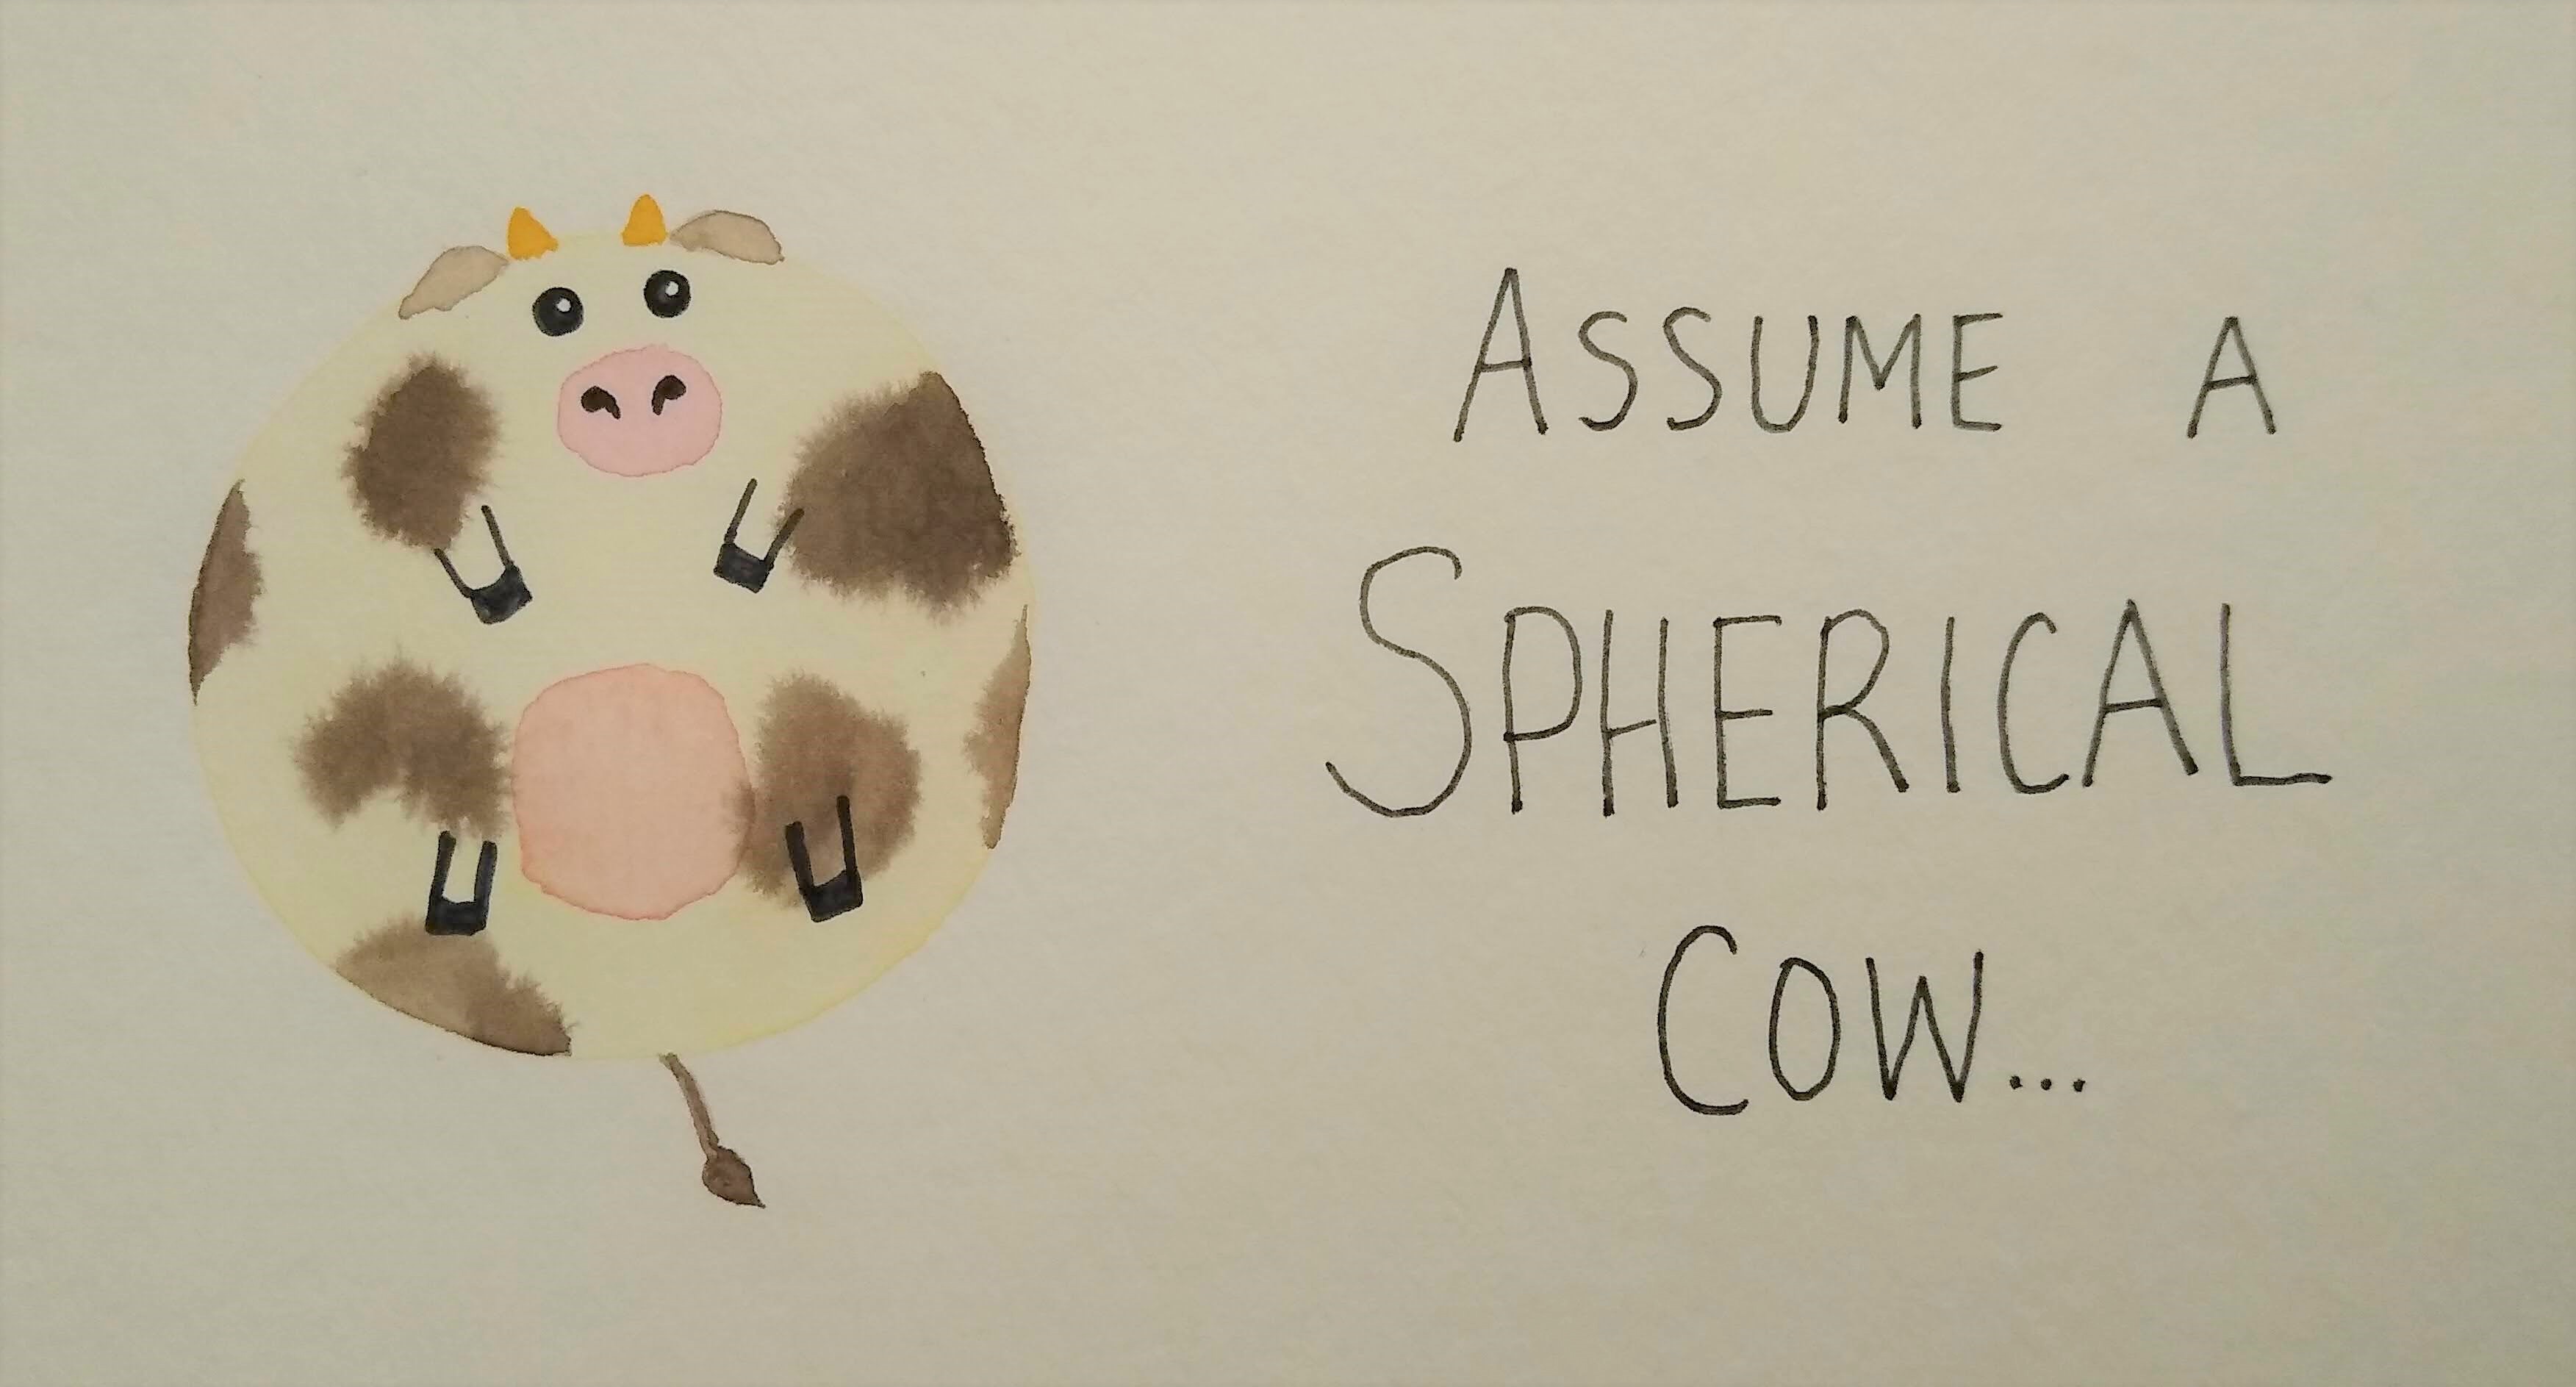 A spherical cow.